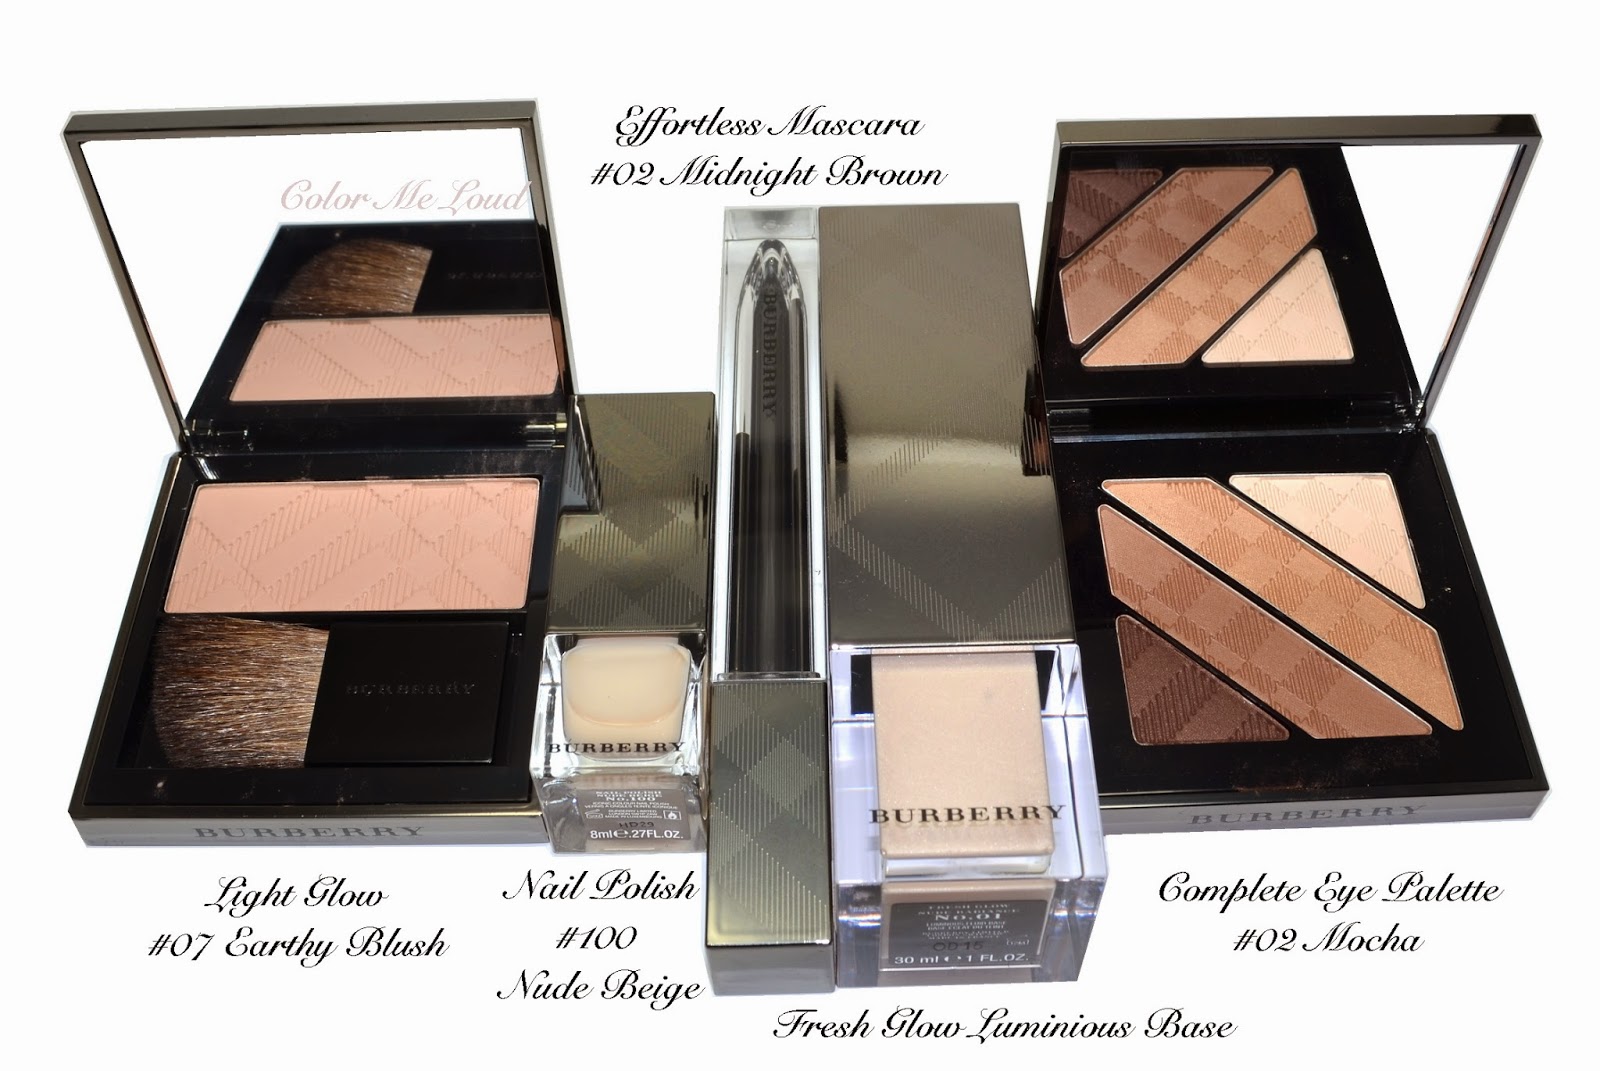 Burberry Complete Eye Palette #02 Mocha, Light Glow #07 Earthy Blush,  Effortless Mascara #02 Midnight Brown and Nail Polish #100 Nude Beige from  Nude Glow Collection, Review, Swatch & FOTD | Color Me Loud